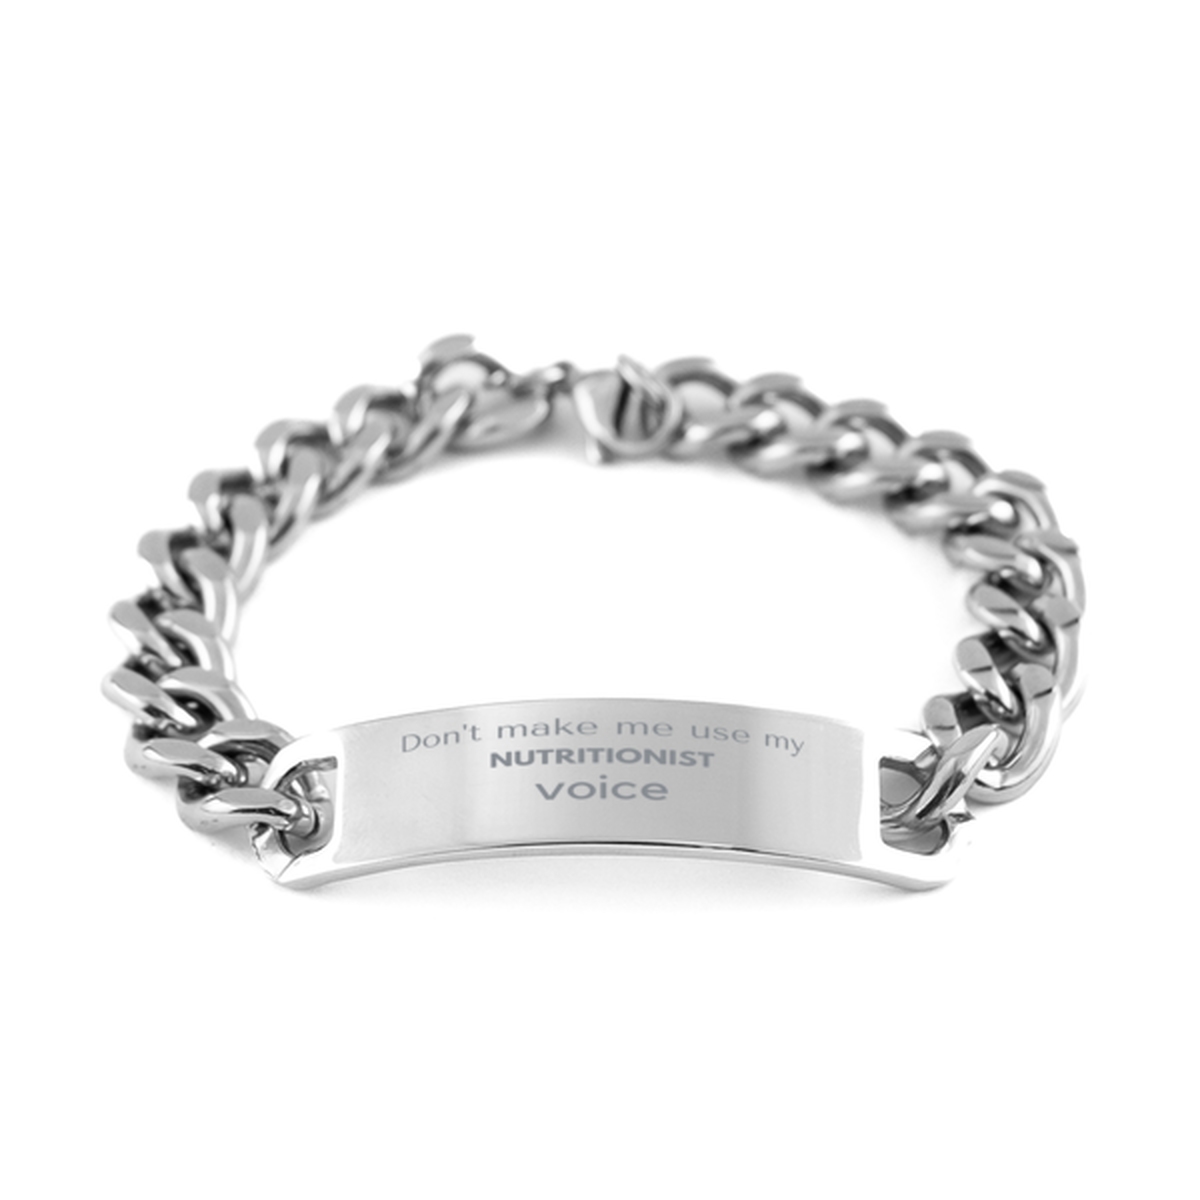 Don't make me use my Nutritionist voice, Sarcasm Nutritionist Gifts, Christmas Nutritionist Cuban Chain Stainless Steel Bracelet Birthday Unique Gifts For Nutritionist Coworkers, Men, Women, Colleague, Friends